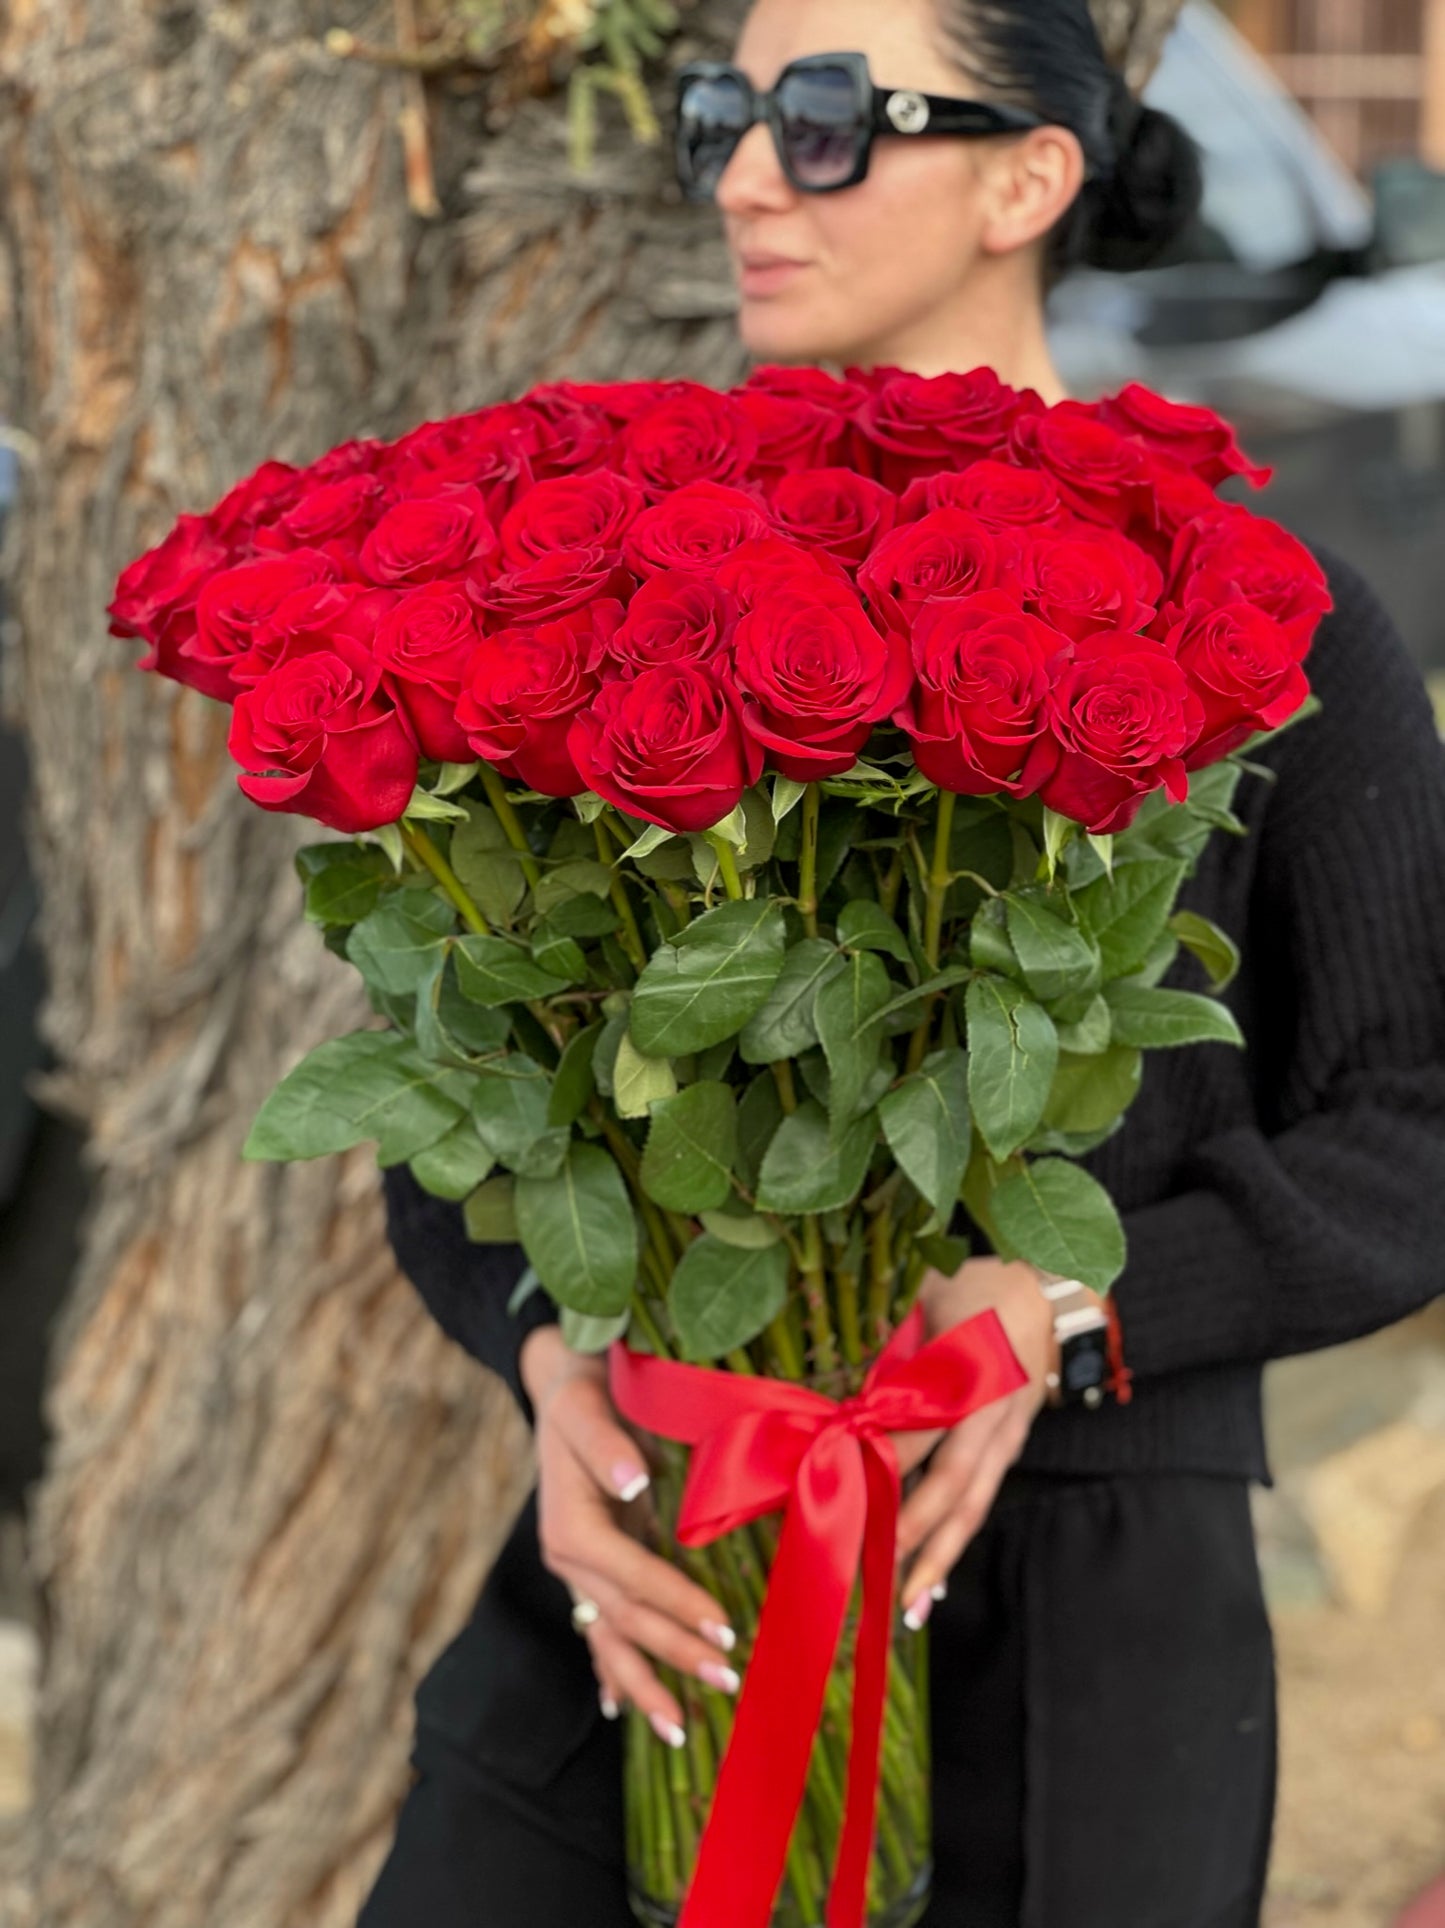 Chic and Charming Premium Roses